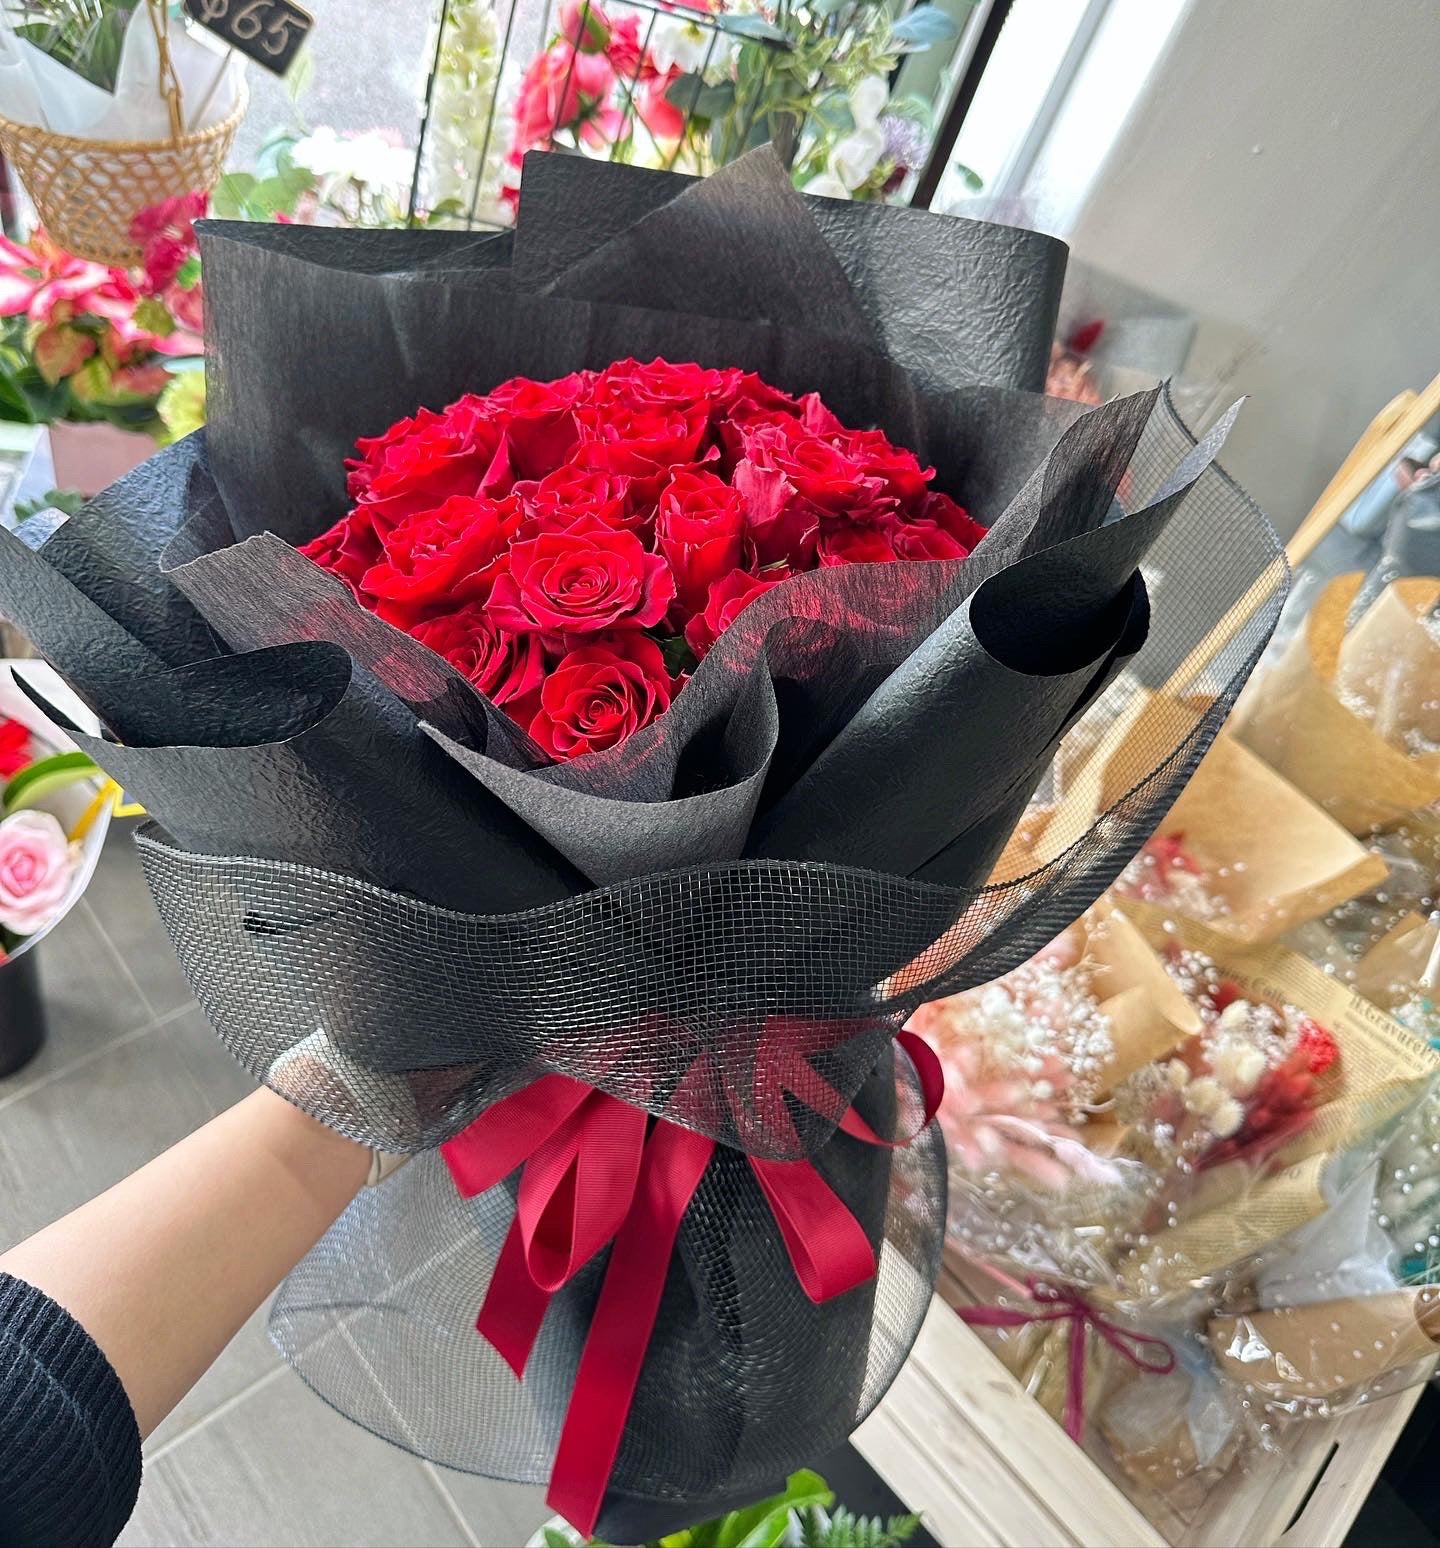 ONLY YOU( Luxury Red rose bouquet with Black wrapping) - Vermont Florist